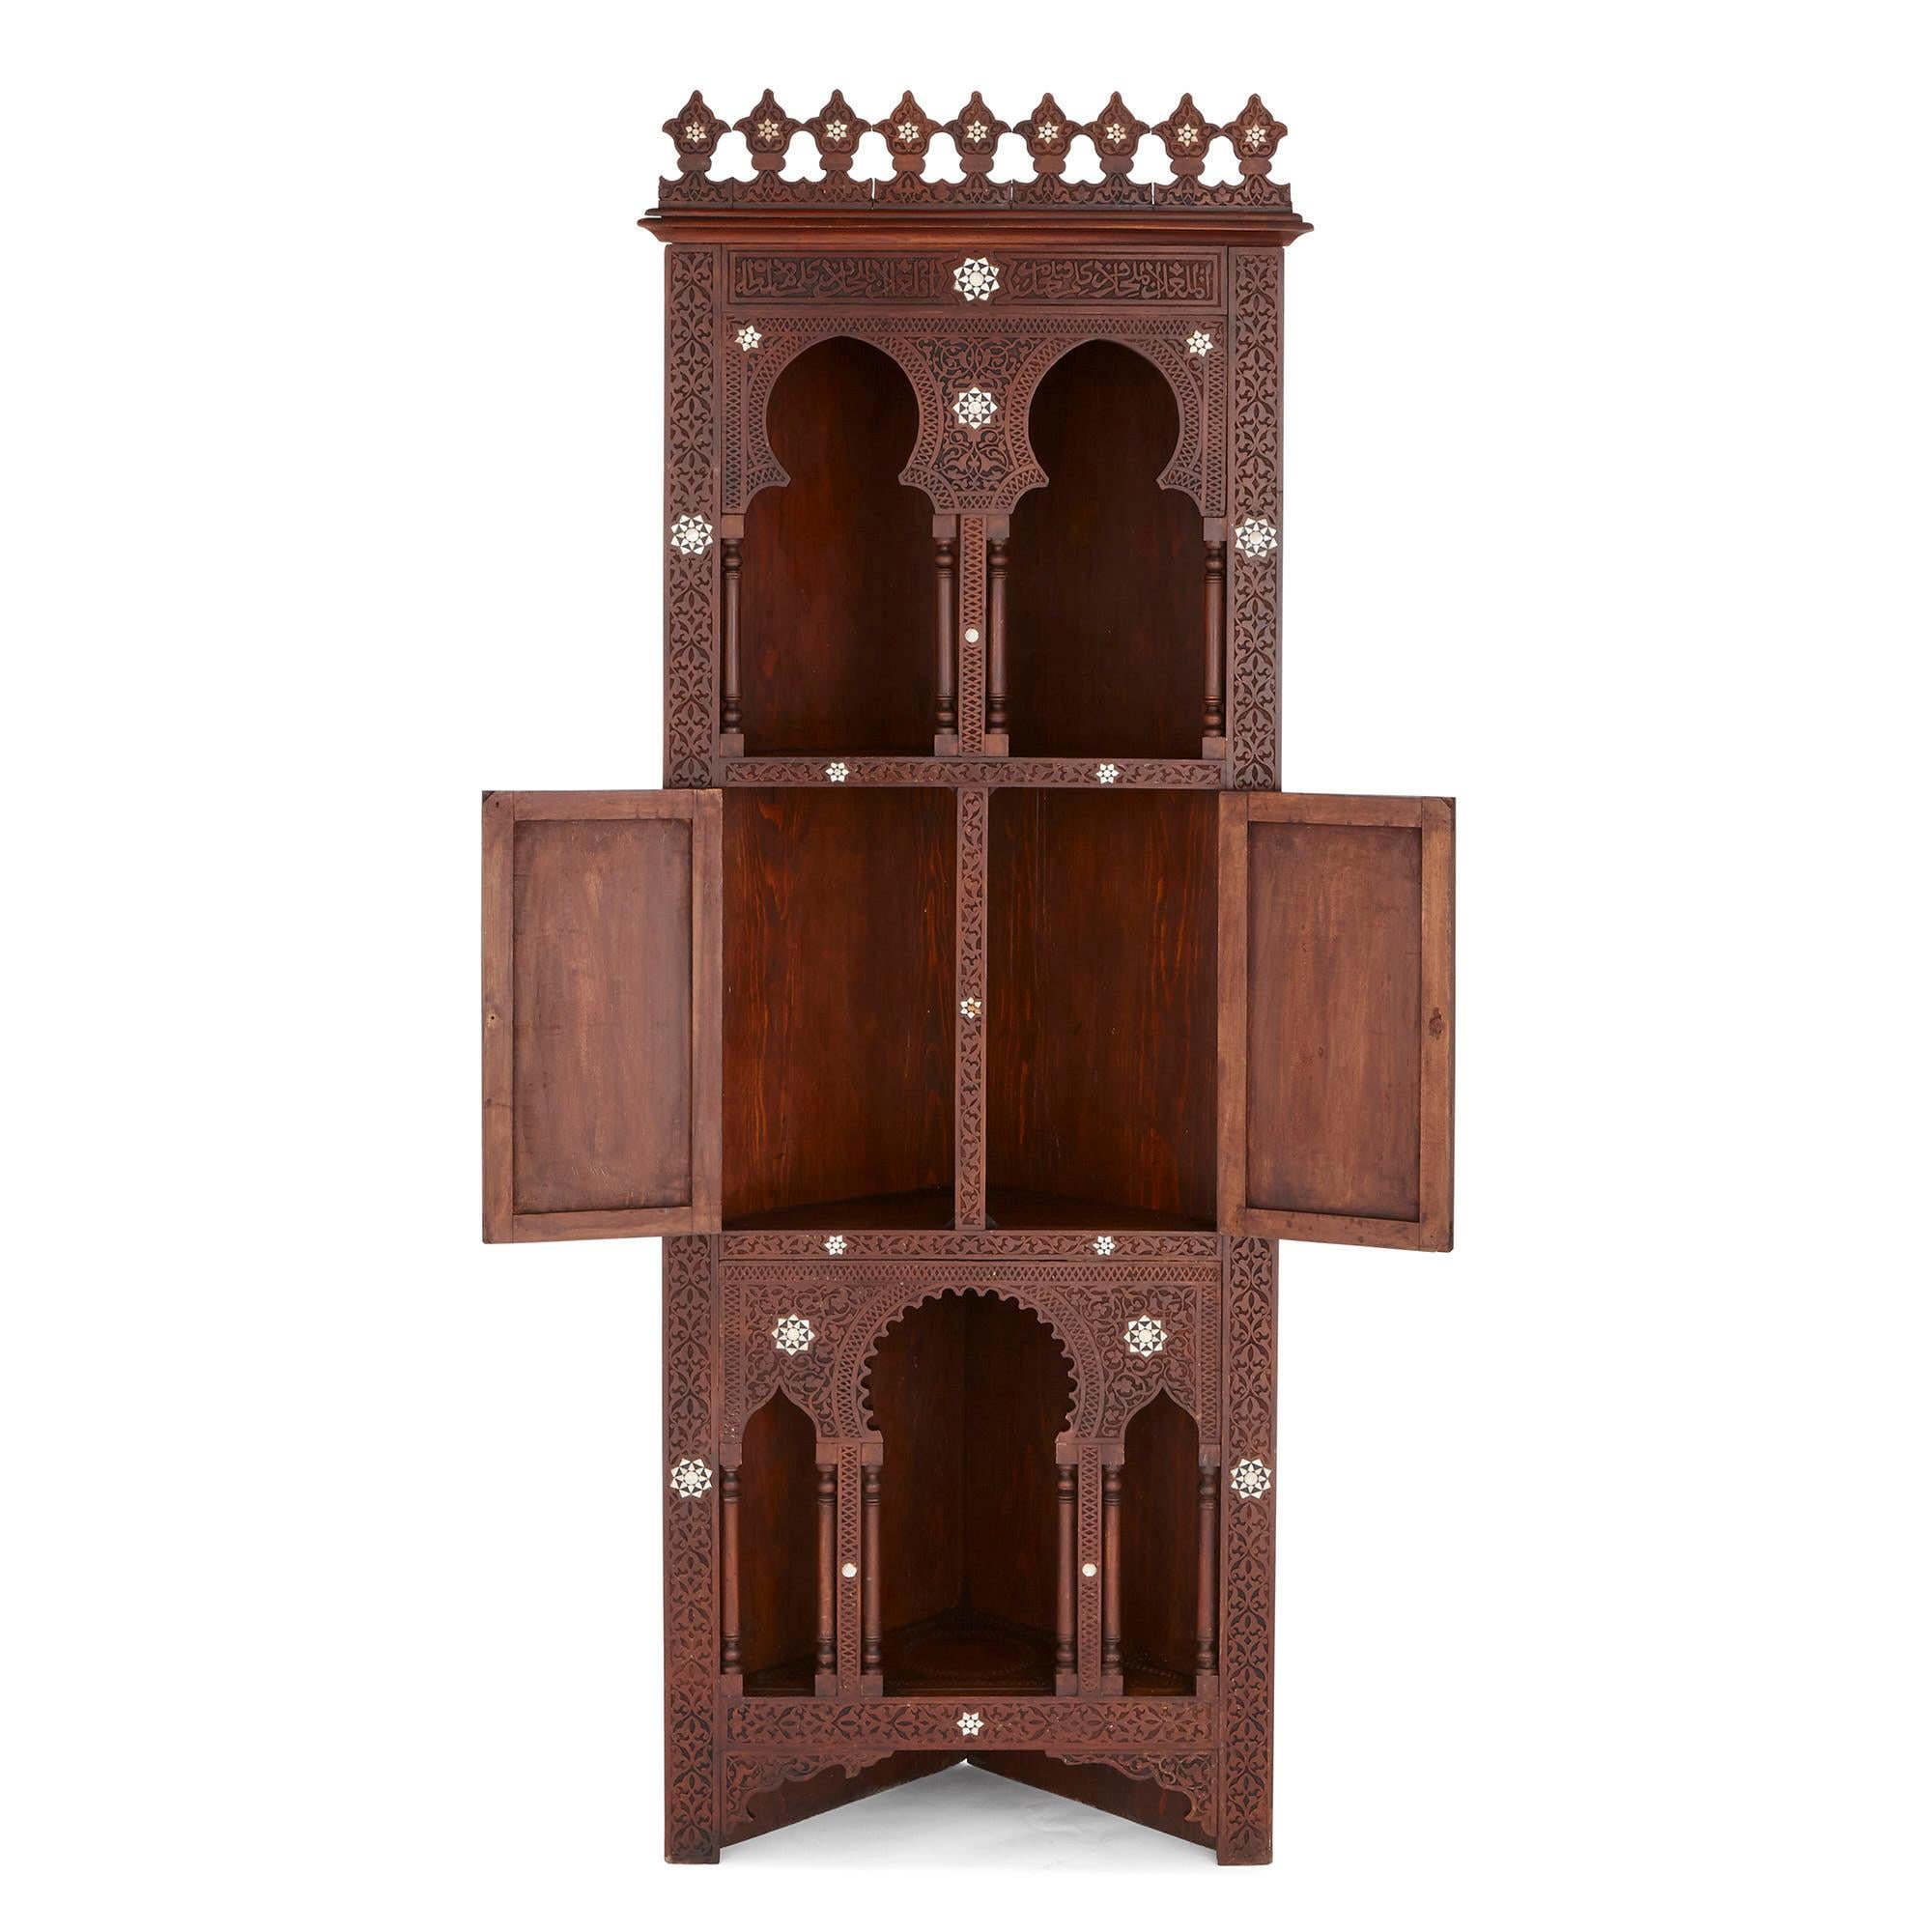 This Indo-Portuguese furniture set, which is comprised of a tall corner cabinet, a stool and side table – is designed in a wonderful Moorish style. This style is a variation of Islamic art, which flourished in North Africa and parts of Spain and